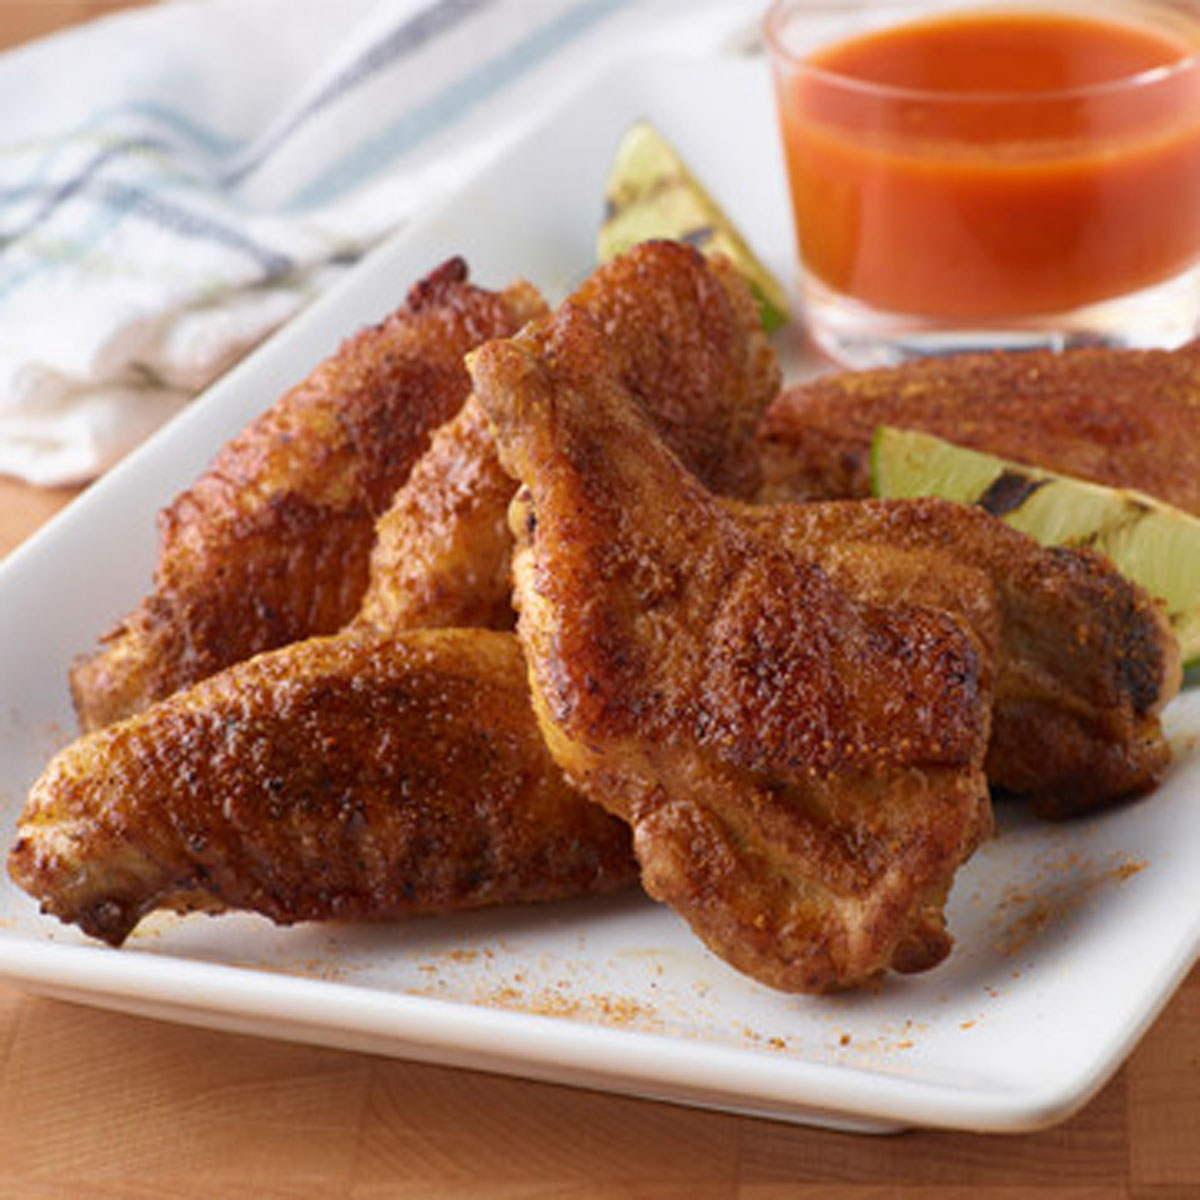 PERDUE® NO ANTIBIOTICS EVER Jumbo Chicken Wing Portions, First and Second Sections Only, Fresh, CVP<br/>(409)